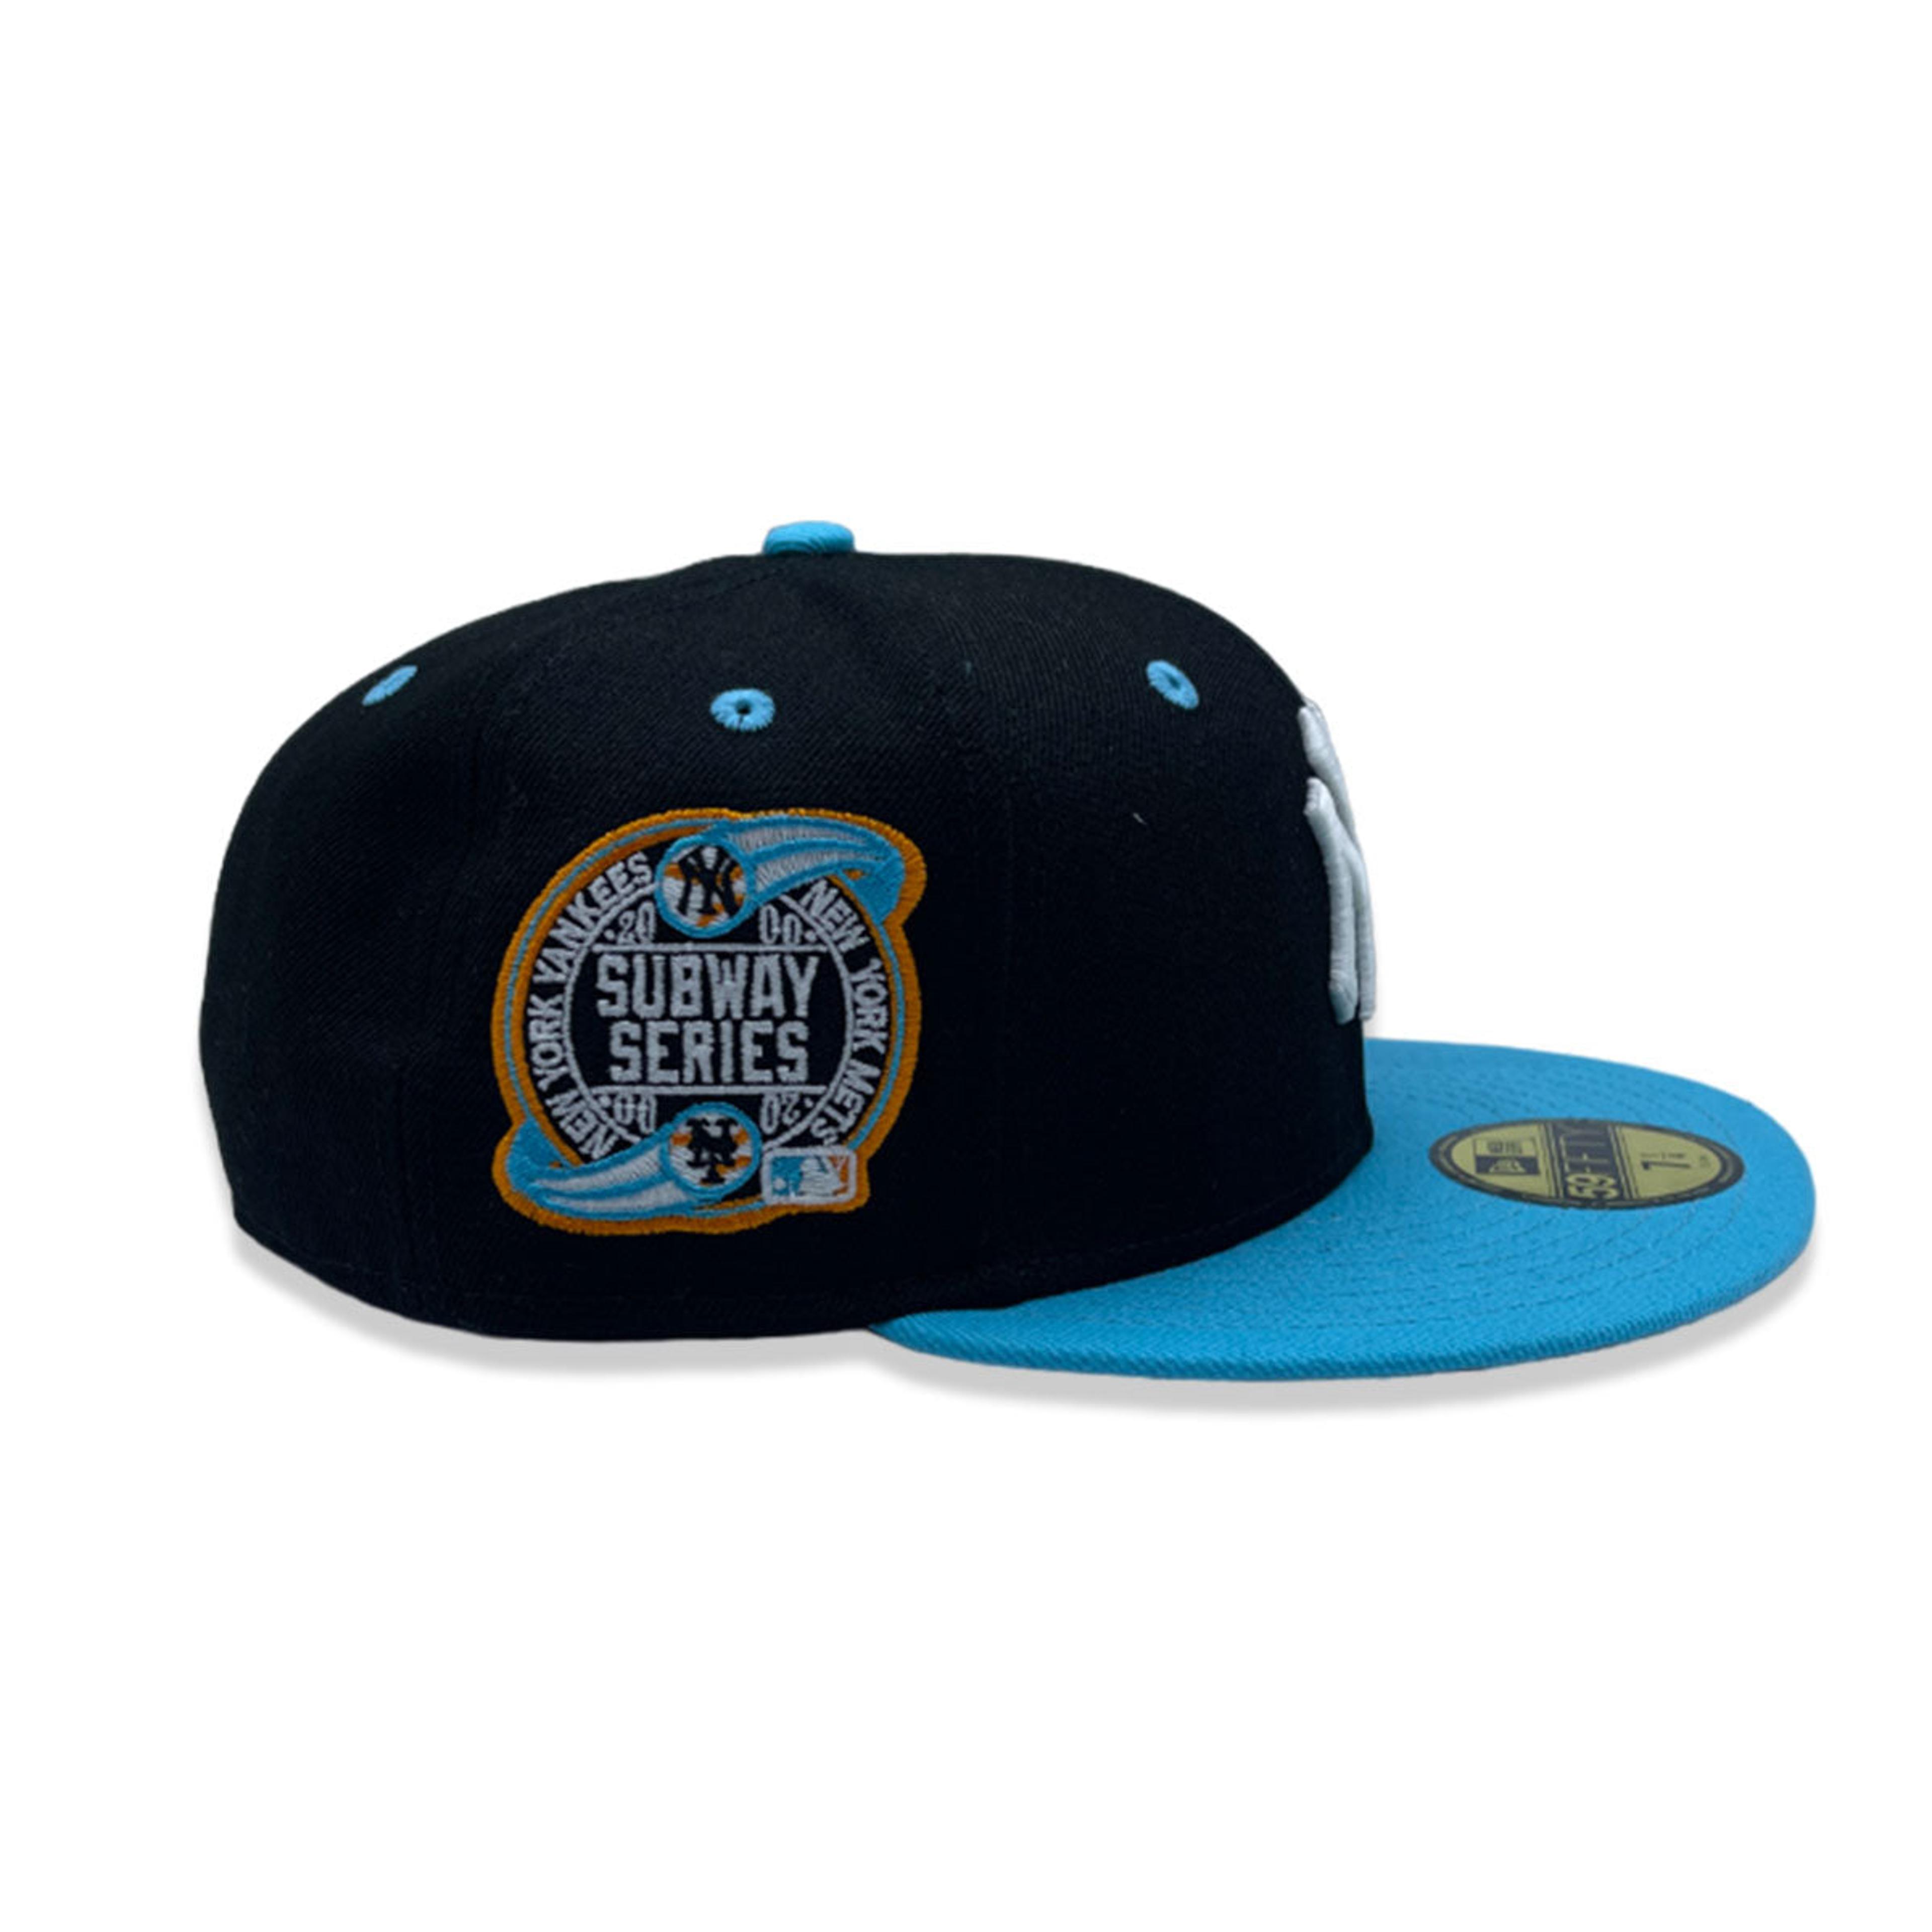 Alternate View 3 of New Era 59Fifty New York Yankees 2000 Subway Series Patch Fitted